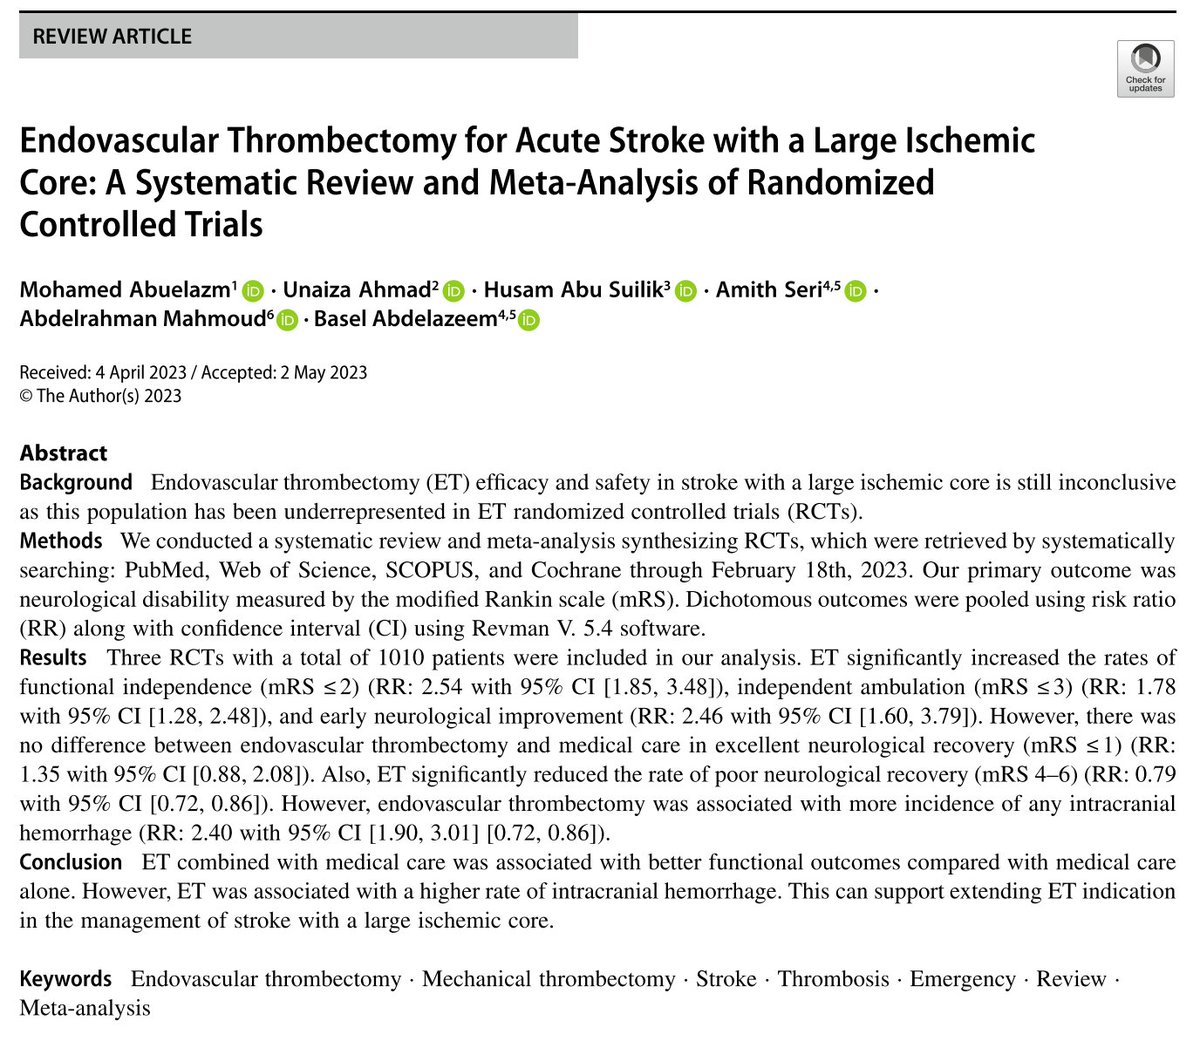 Endovascular thrombectomy can be a viable option for large stroke management. 
For more details read our just published review in Clinical Neuroradiology:
link.springer.com/article/10.100…

Great team effort as always, keep it up everyone 💪👏.